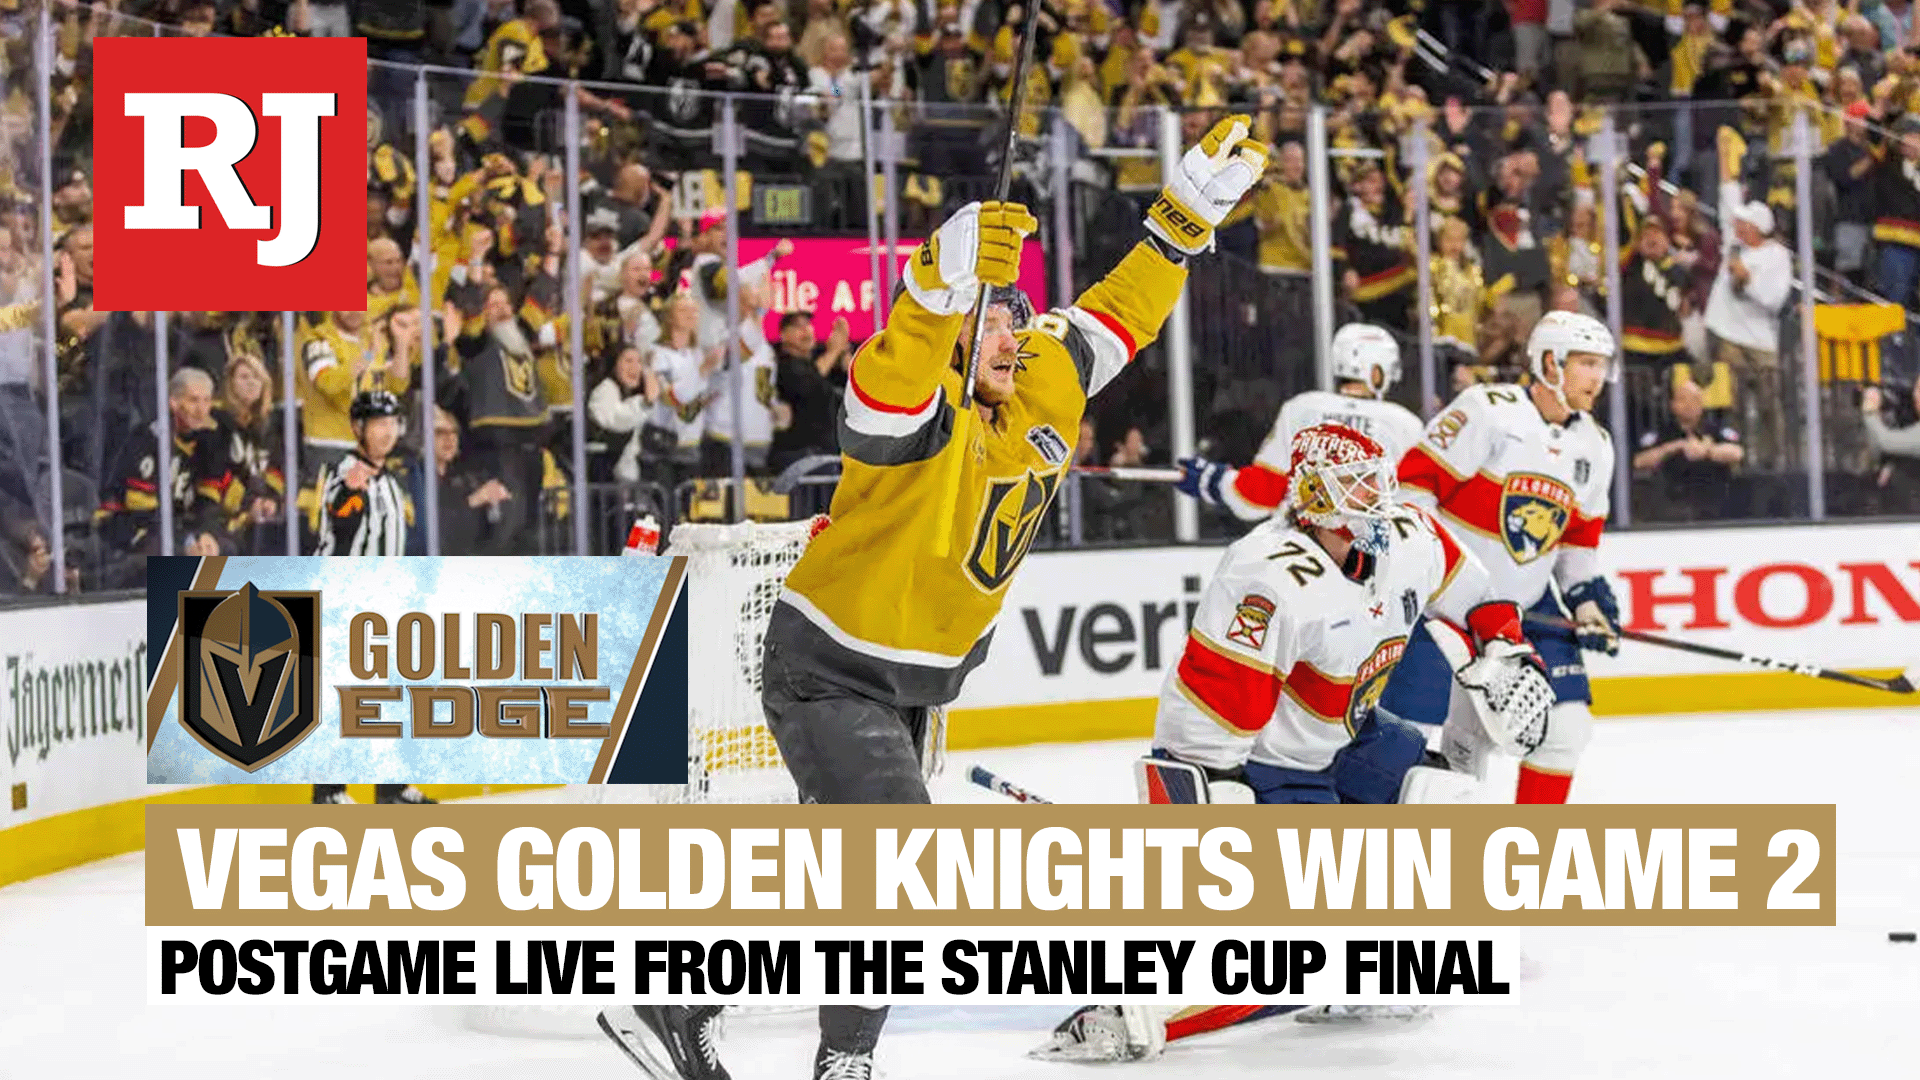 Vegas Golden Knights postgame live from Stanley Cup Final